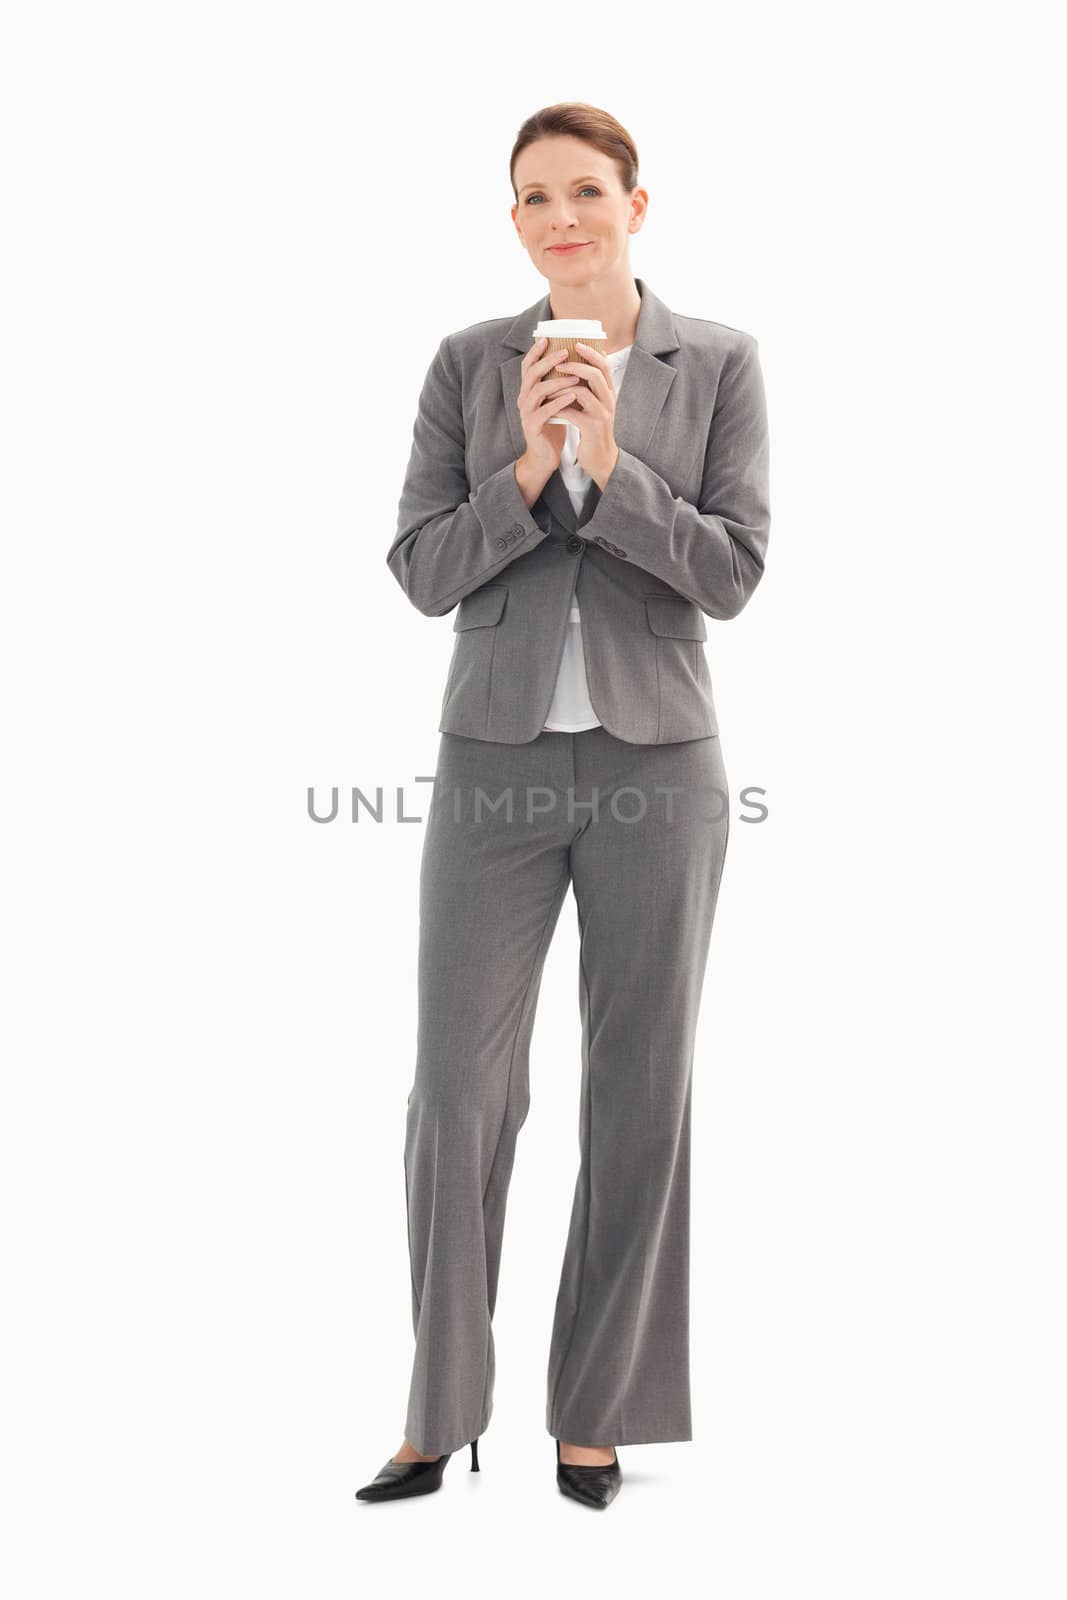 Businesswoman holding cup of coffee with both hands by Wavebreakmedia